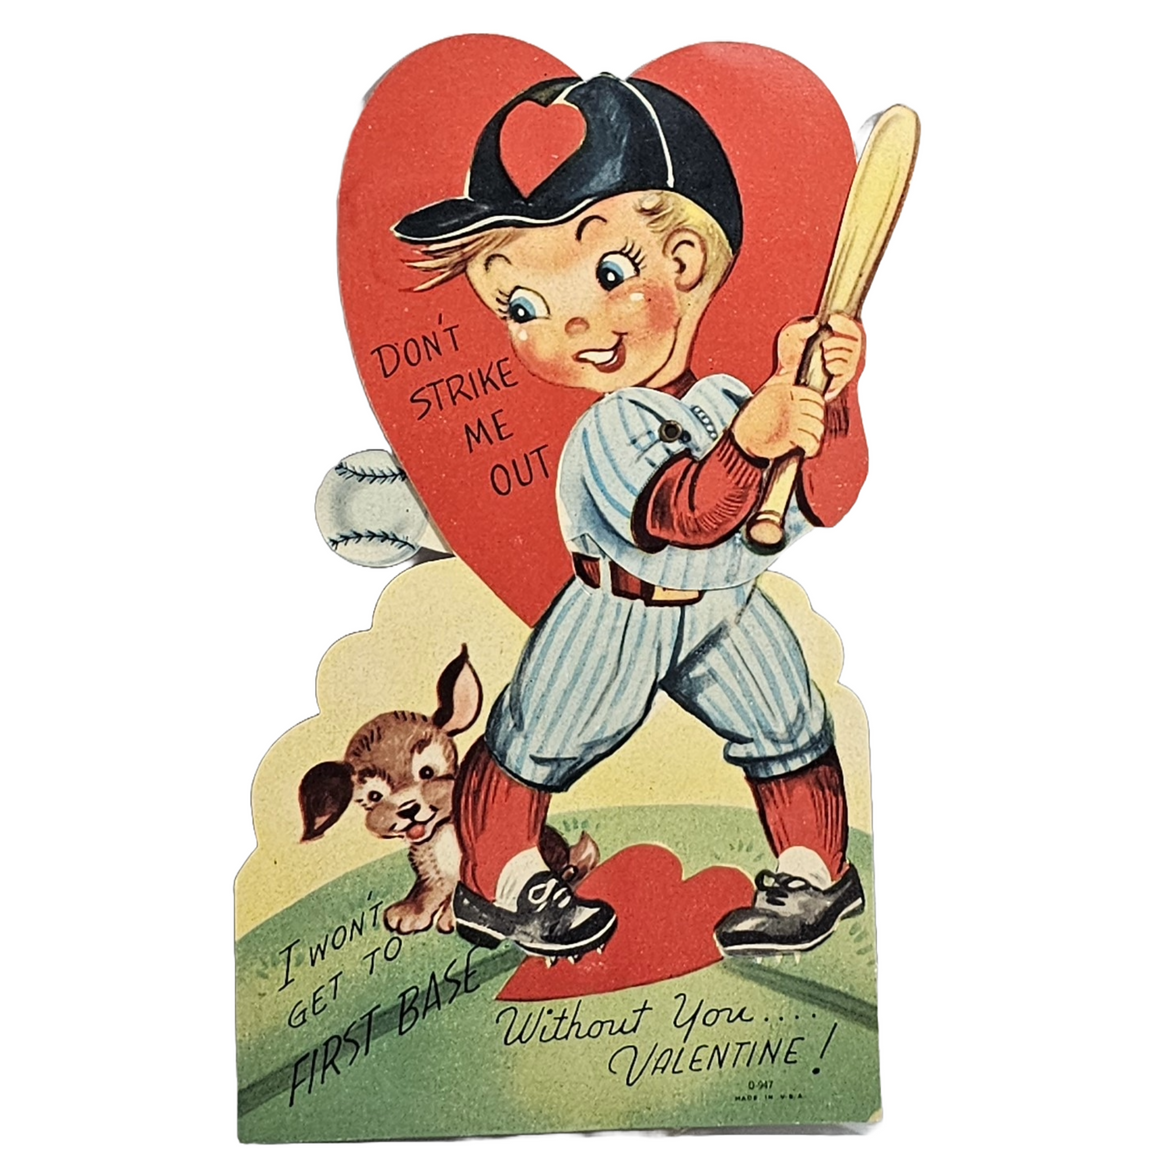 Larger Sized Mechanical Valentine Card Boy Swinging at Baseball with Puppy Dog Watching at Feet